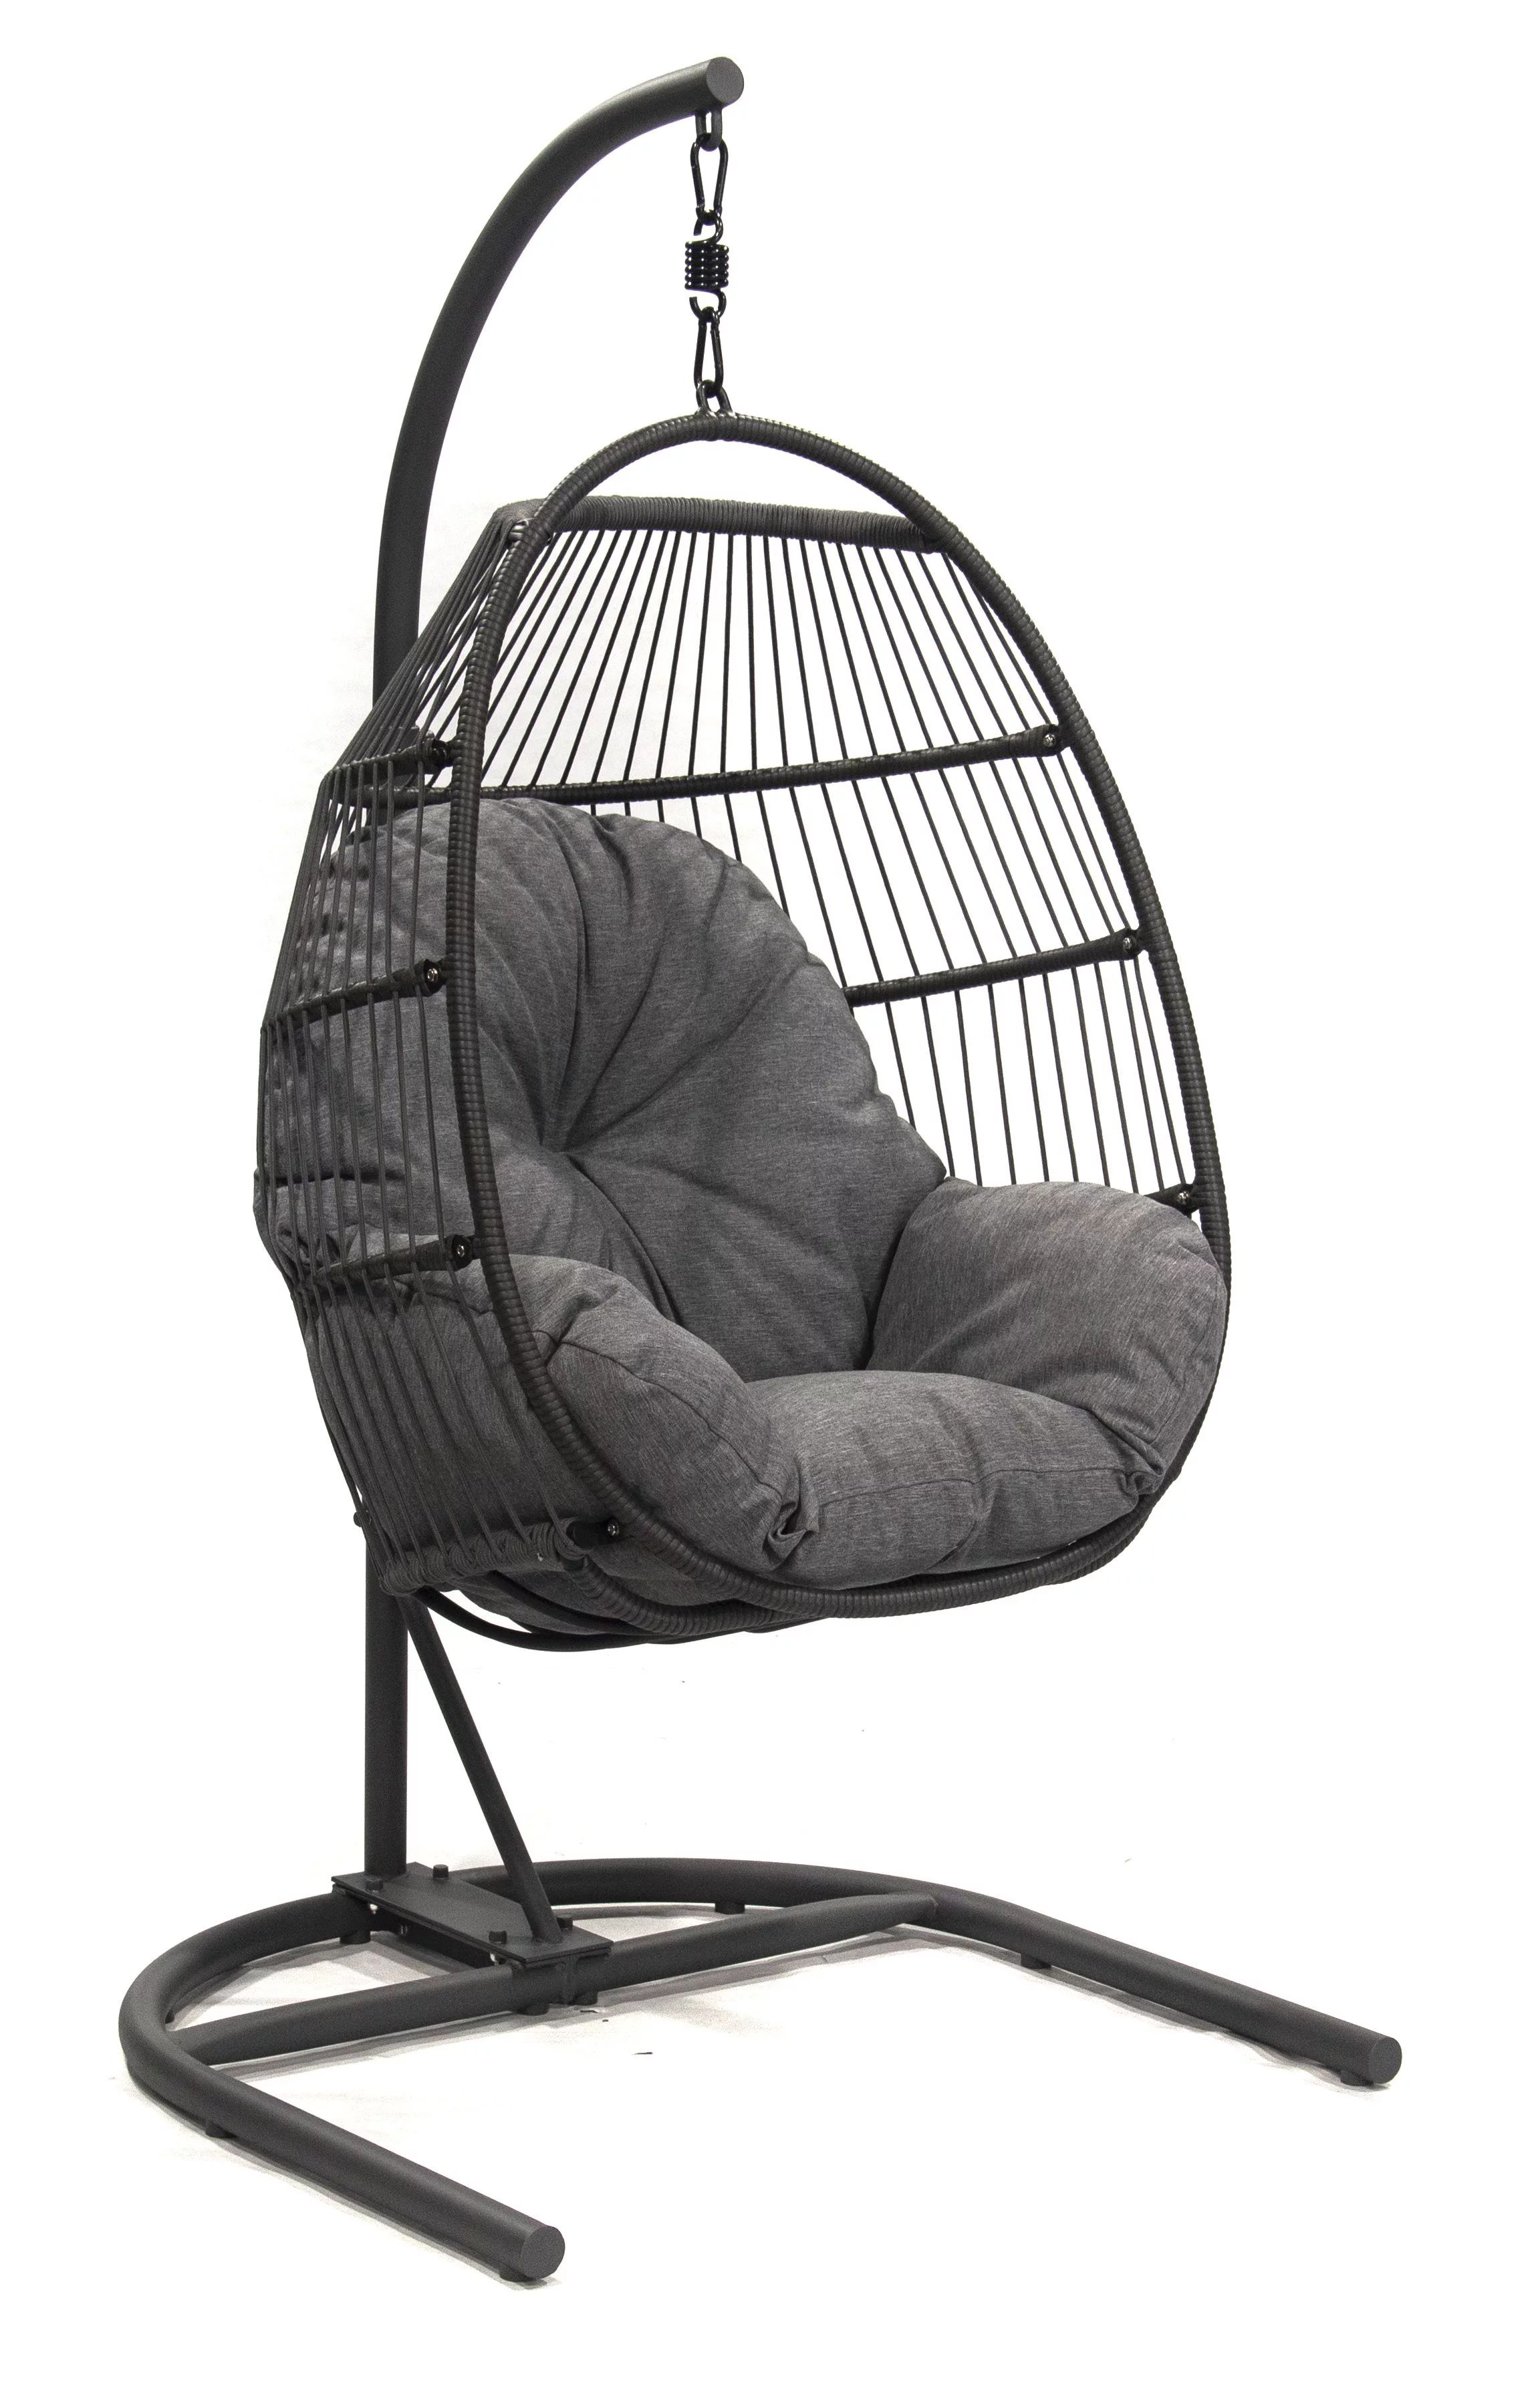 Outdoor Patio Hanging Egg Chair with Olefin Cushion and Metal Stand, Gray | Walmart (US)